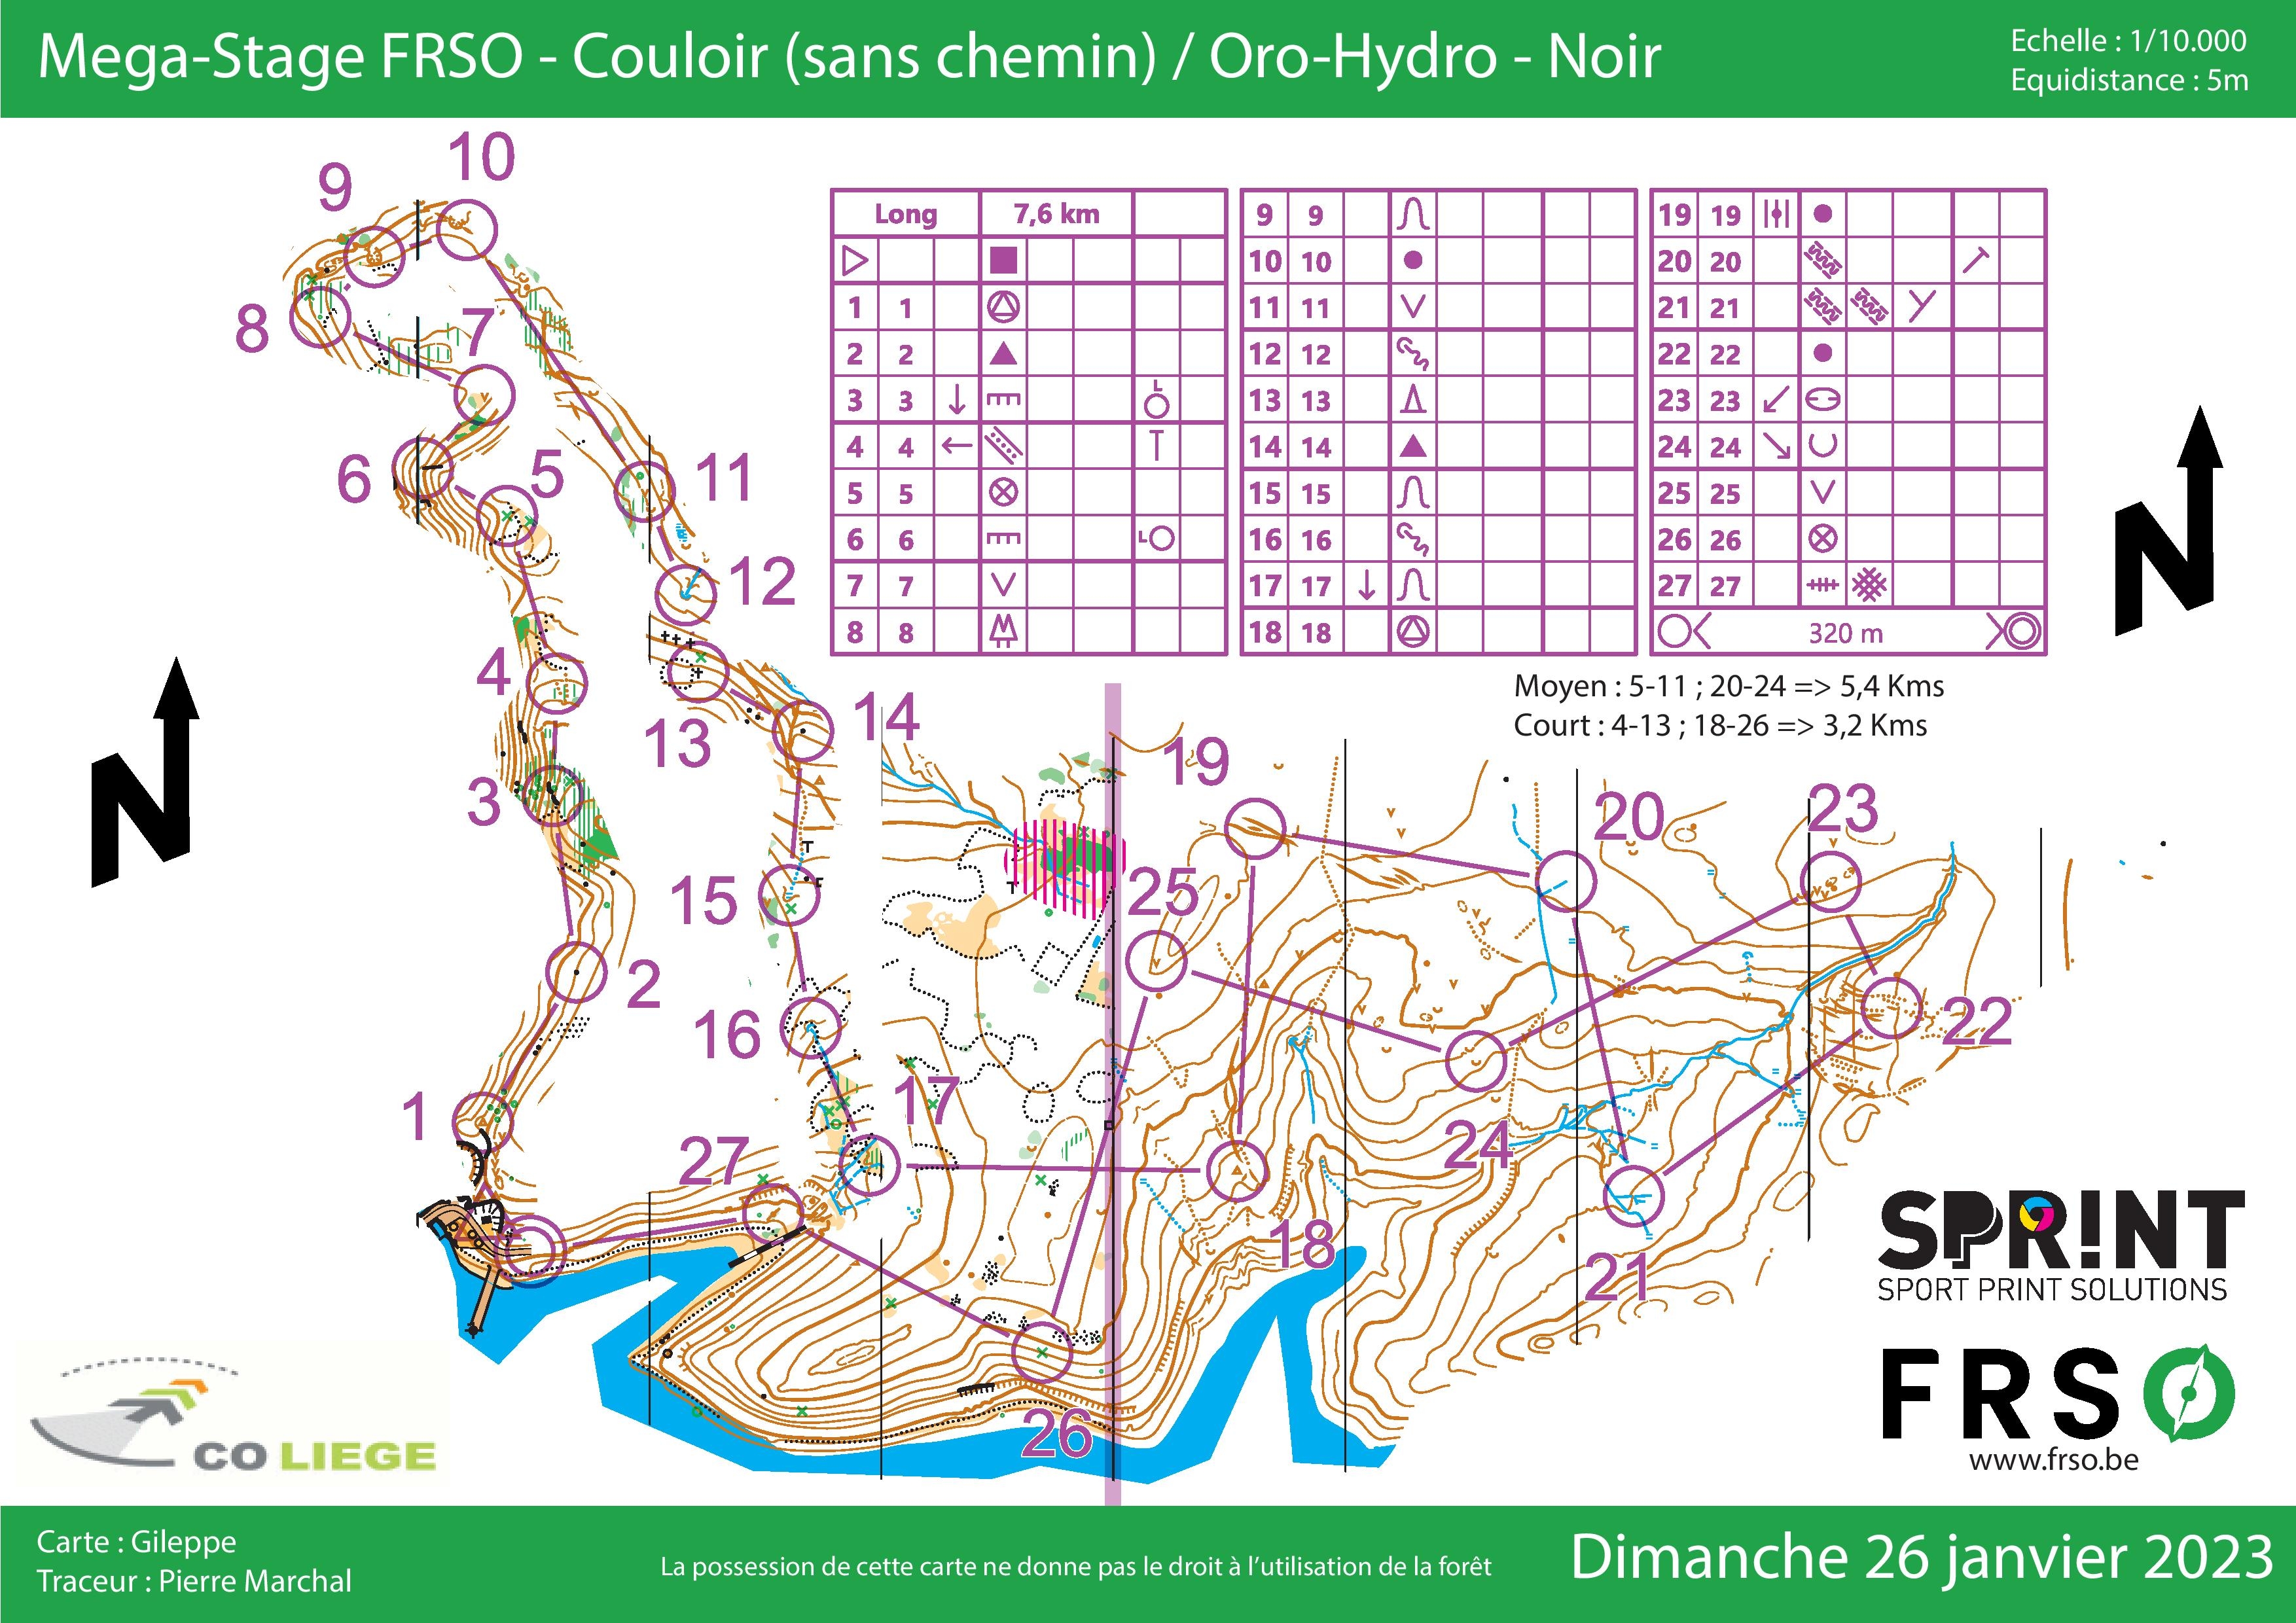 Mégastage FRSO - Couloir et Oro-hydro (26-02-2023)